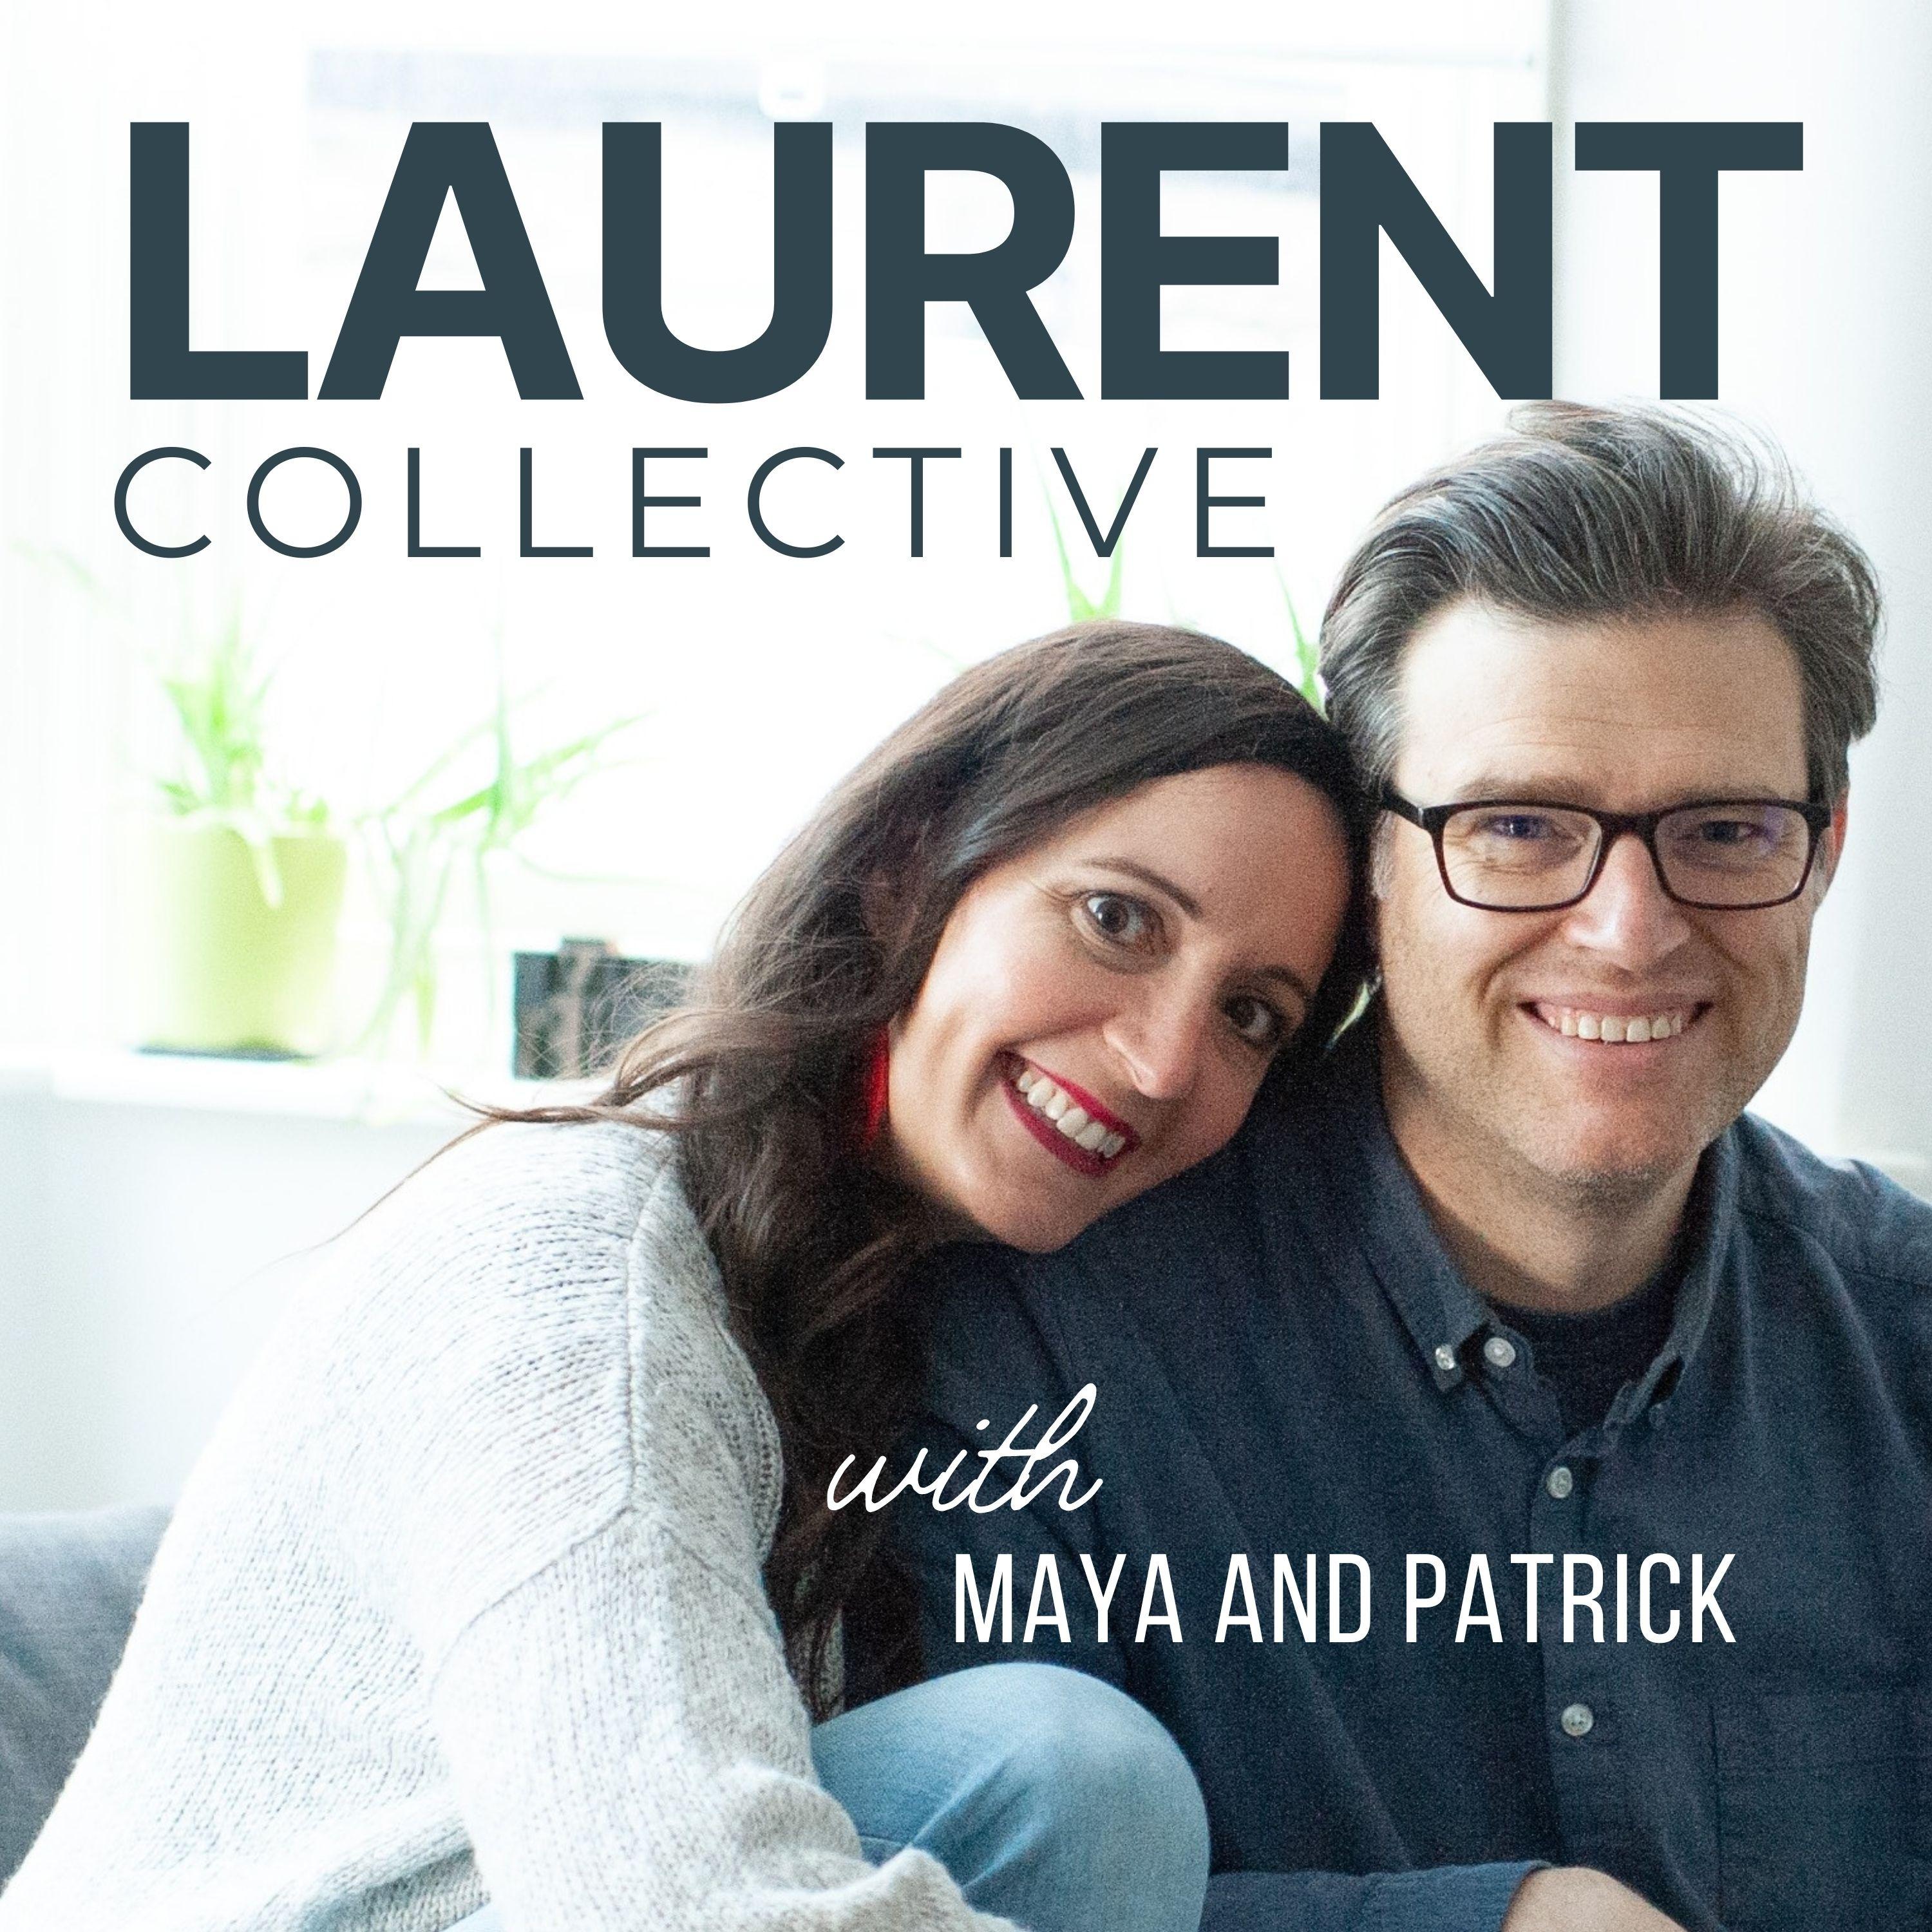 Laurent Collective Podcast